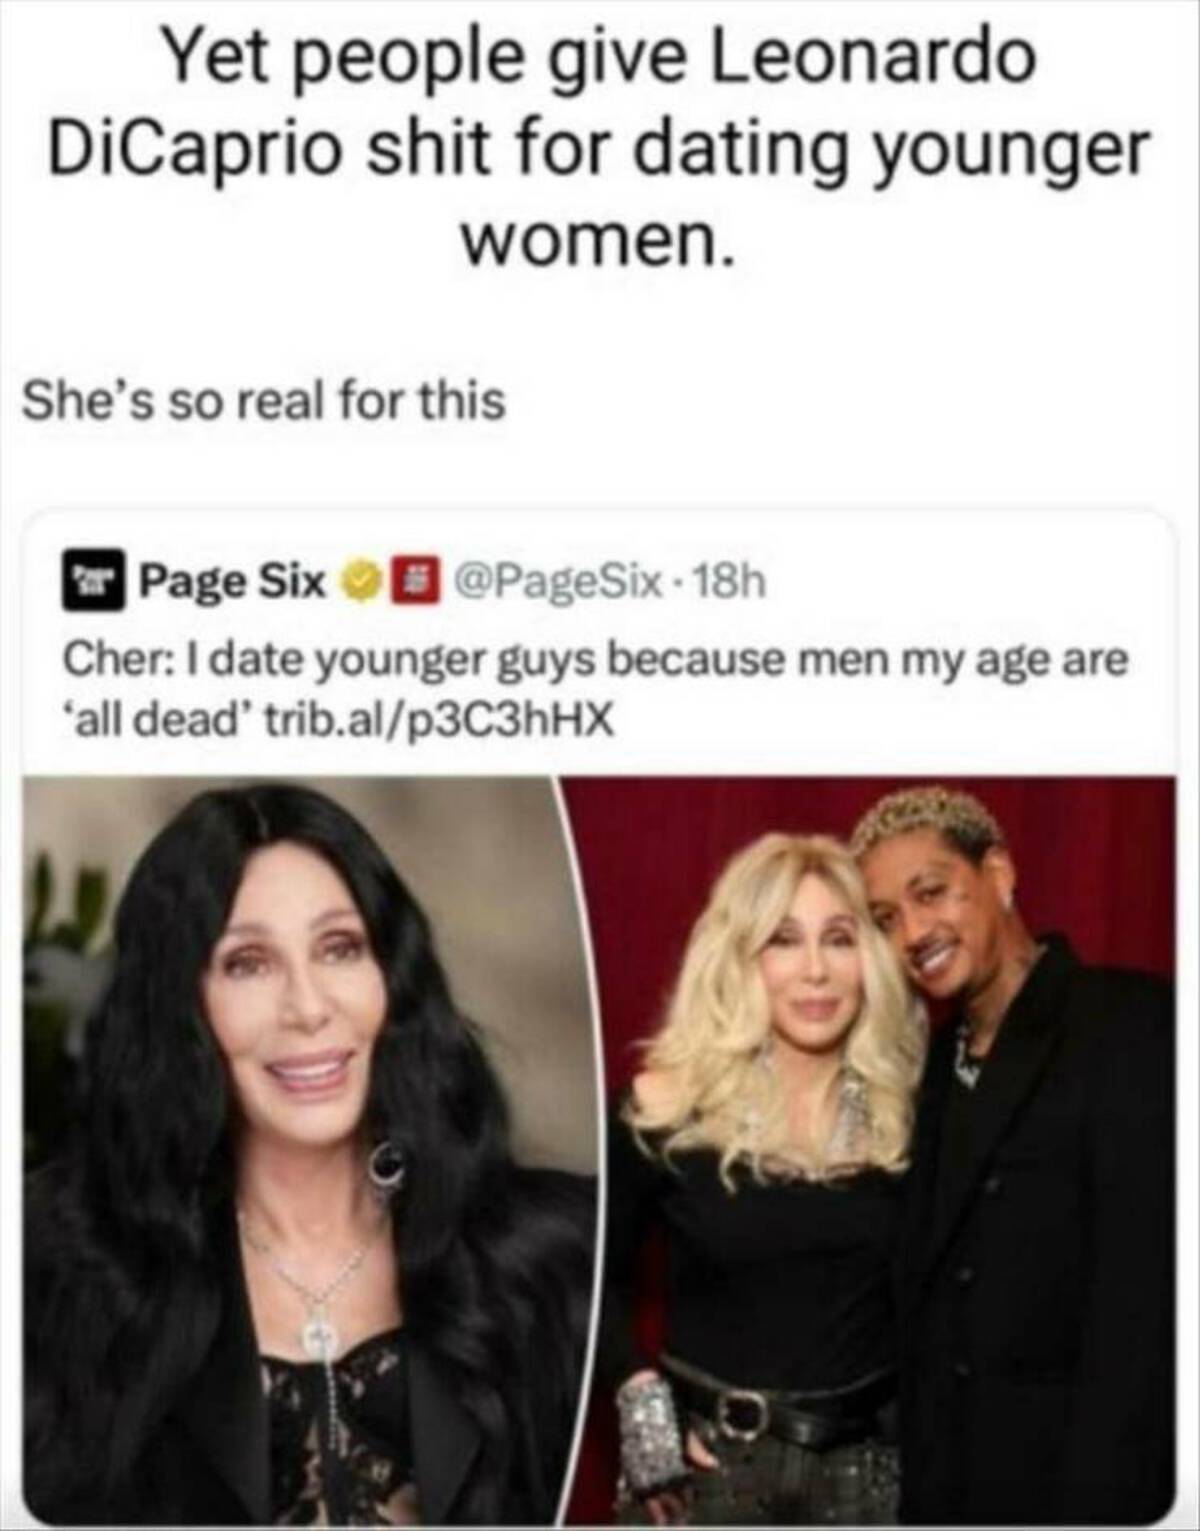 Cher - Yet people give Leonardo DiCaprio shit for dating younger women. She's so real for this Page Six Cher I date younger guys because men my age are 'all dead' trib.alp3C3hHX